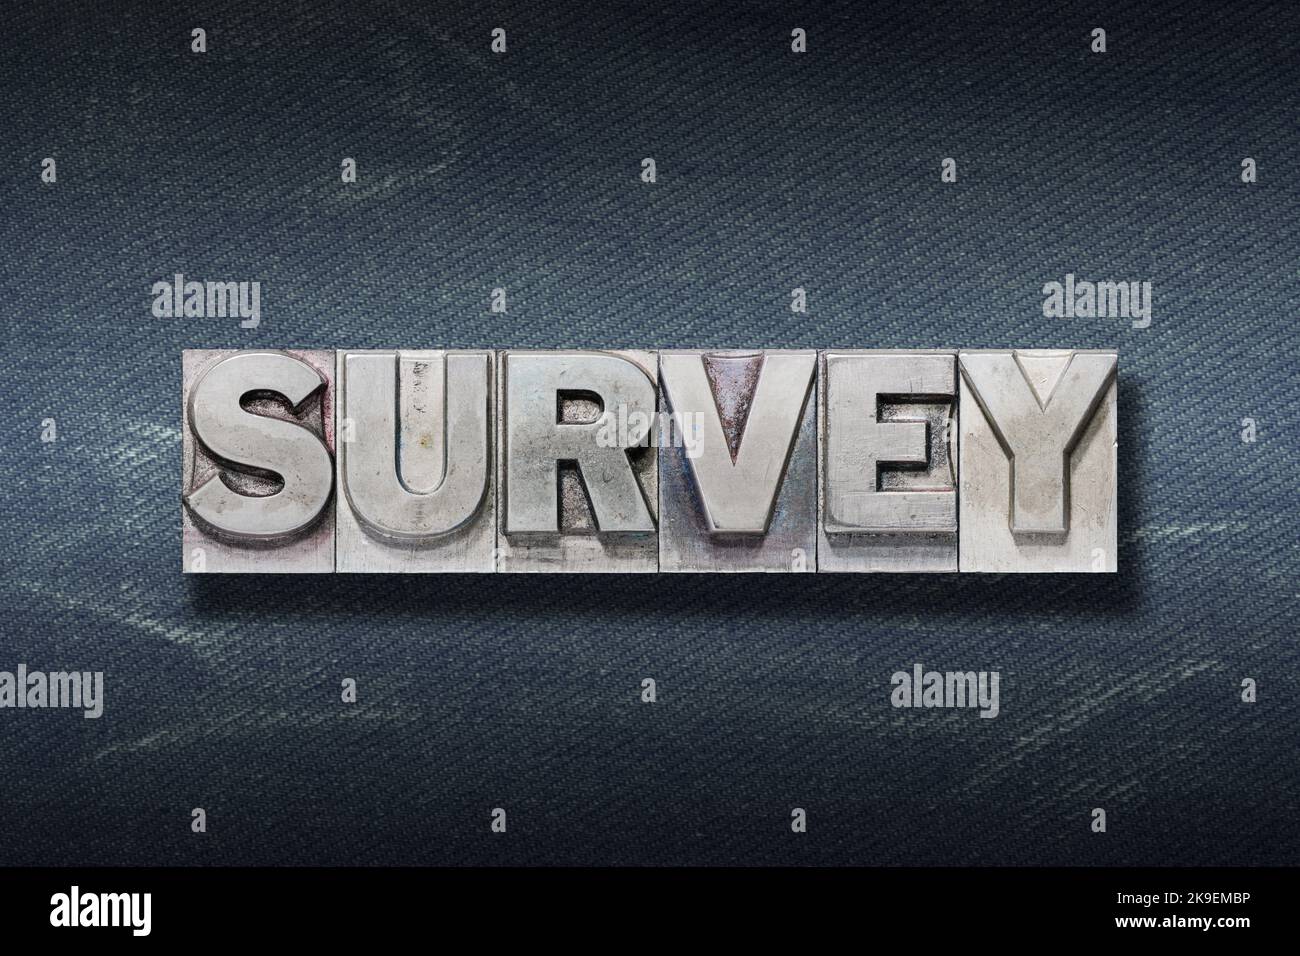 survey word made from metallic letterpress on dark jeans background Stock Photo